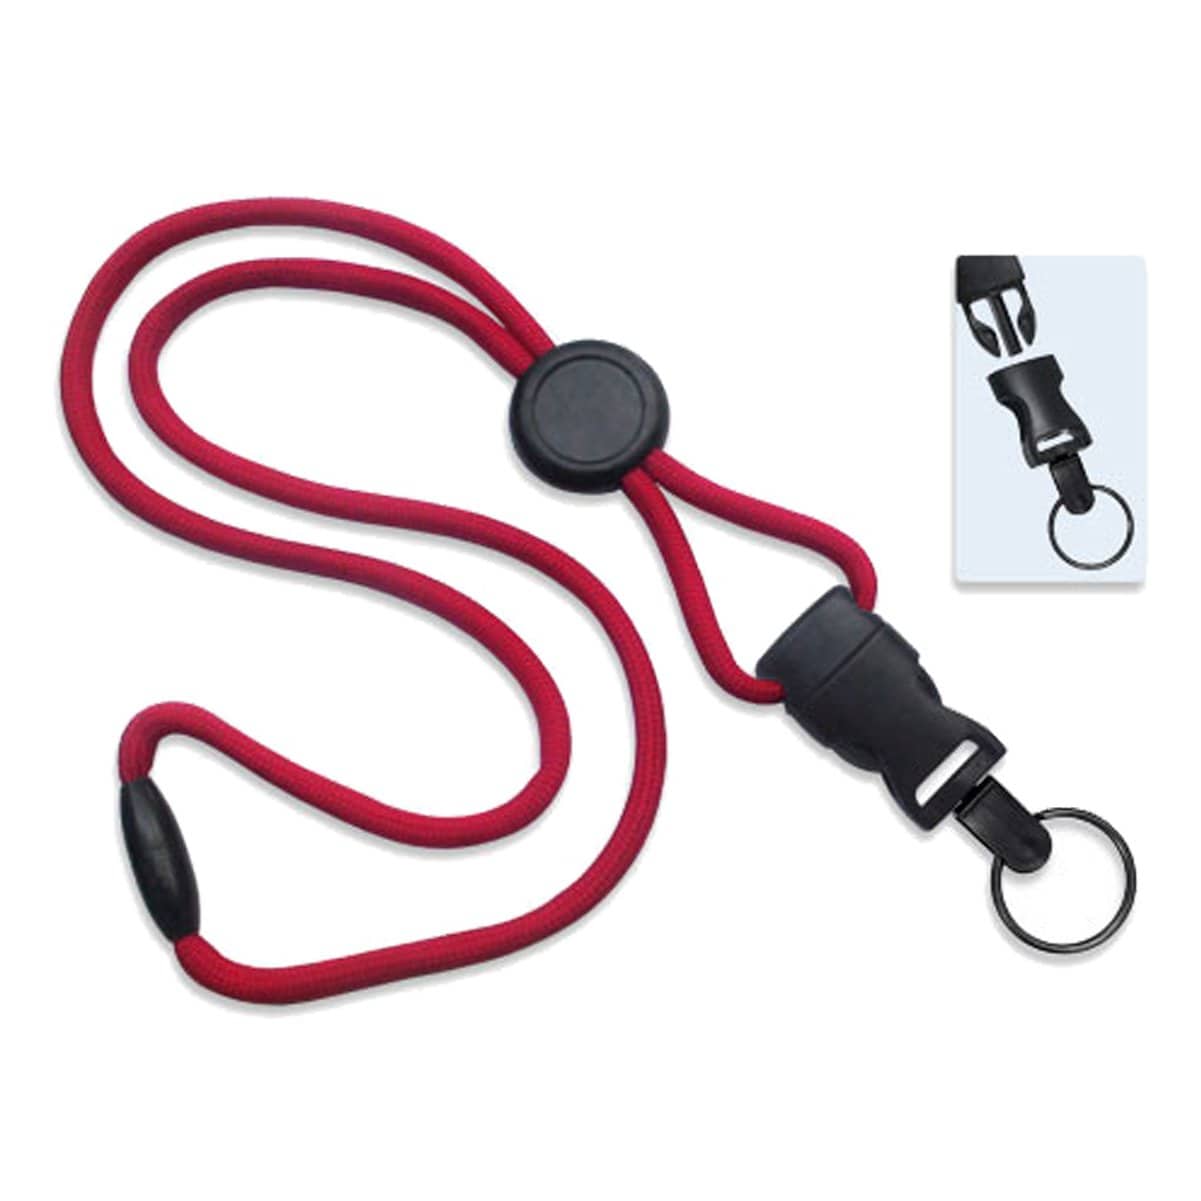 A Breakaway Lanyard with Round Slider And Detachable Key Ring 2135-461X with a black clasp and a keyring attachment. A small inset image shows a close-up of the clasp mechanism, highlighting its safety features.